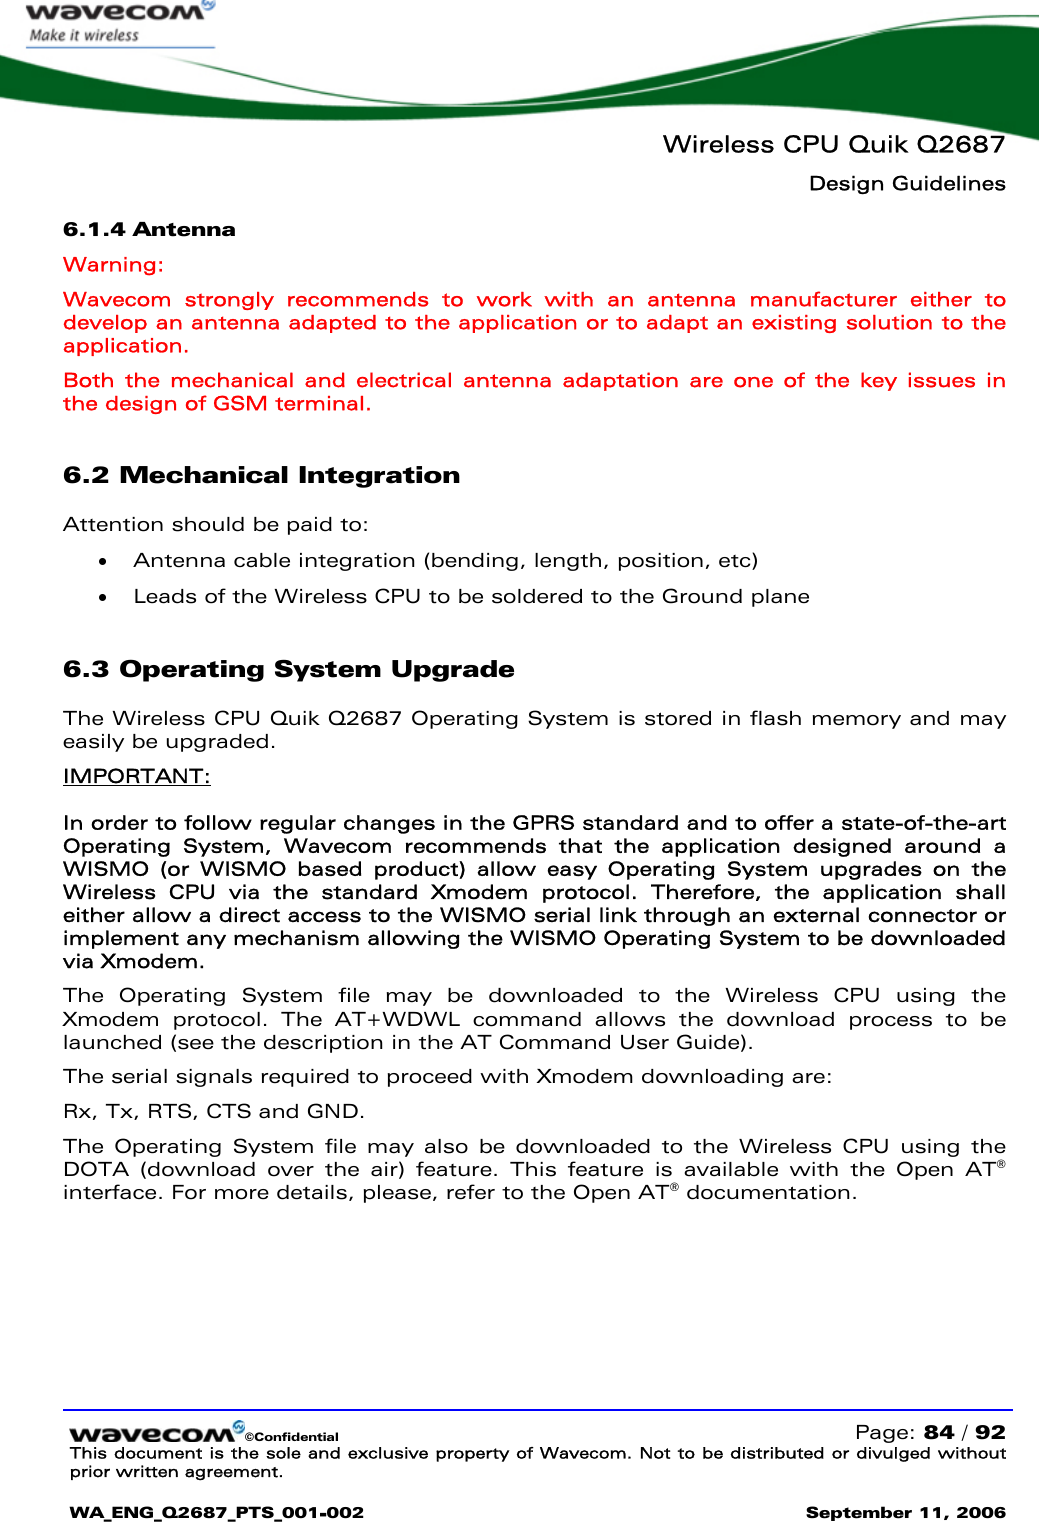   Wireless CPU Quik Q2687 Design Guidelines   ©Confidential   Page: 84 / 92 This document is the sole and exclusive property of Wavecom. Not to be distributed or divulged without prior written agreement.  WA_ENG_Q2687_PTS_001-002 September 11, 2006   6.1.4 Antenna Warning: Wavecom strongly recommends to work with an antenna manufacturer either to develop an antenna adapted to the application or to adapt an existing solution to the application.  Both the mechanical and electrical antenna adaptation are one of the key issues in the design of GSM terminal. 6.2 Mechanical Integration Attention should be paid to: • Antenna cable integration (bending, length, position, etc) • Leads of the Wireless CPU to be soldered to the Ground plane 6.3 Operating System Upgrade The Wireless CPU Quik Q2687 Operating System is stored in flash memory and may easily be upgraded. IMPORTANT: In order to follow regular changes in the GPRS standard and to offer a state-of-the-art Operating System, Wavecom recommends that the application designed around a WISMO (or WISMO based product) allow easy Operating System upgrades on the Wireless CPU via the standard Xmodem protocol. Therefore, the application shall either allow a direct access to the WISMO serial link through an external connector or implement any mechanism allowing the WISMO Operating System to be downloaded via Xmodem. The Operating System file may be downloaded to the Wireless CPU using the Xmodem protocol. The AT+WDWL command allows the download process to be launched (see the description in the AT Command User Guide). The serial signals required to proceed with Xmodem downloading are: Rx, Tx, RTS, CTS and GND. The Operating System file may also be downloaded to the Wireless CPU using the DOTA (download over the air) feature. This feature is available with the Open AT® interface. For more details, please, refer to the Open AT® documentation.  